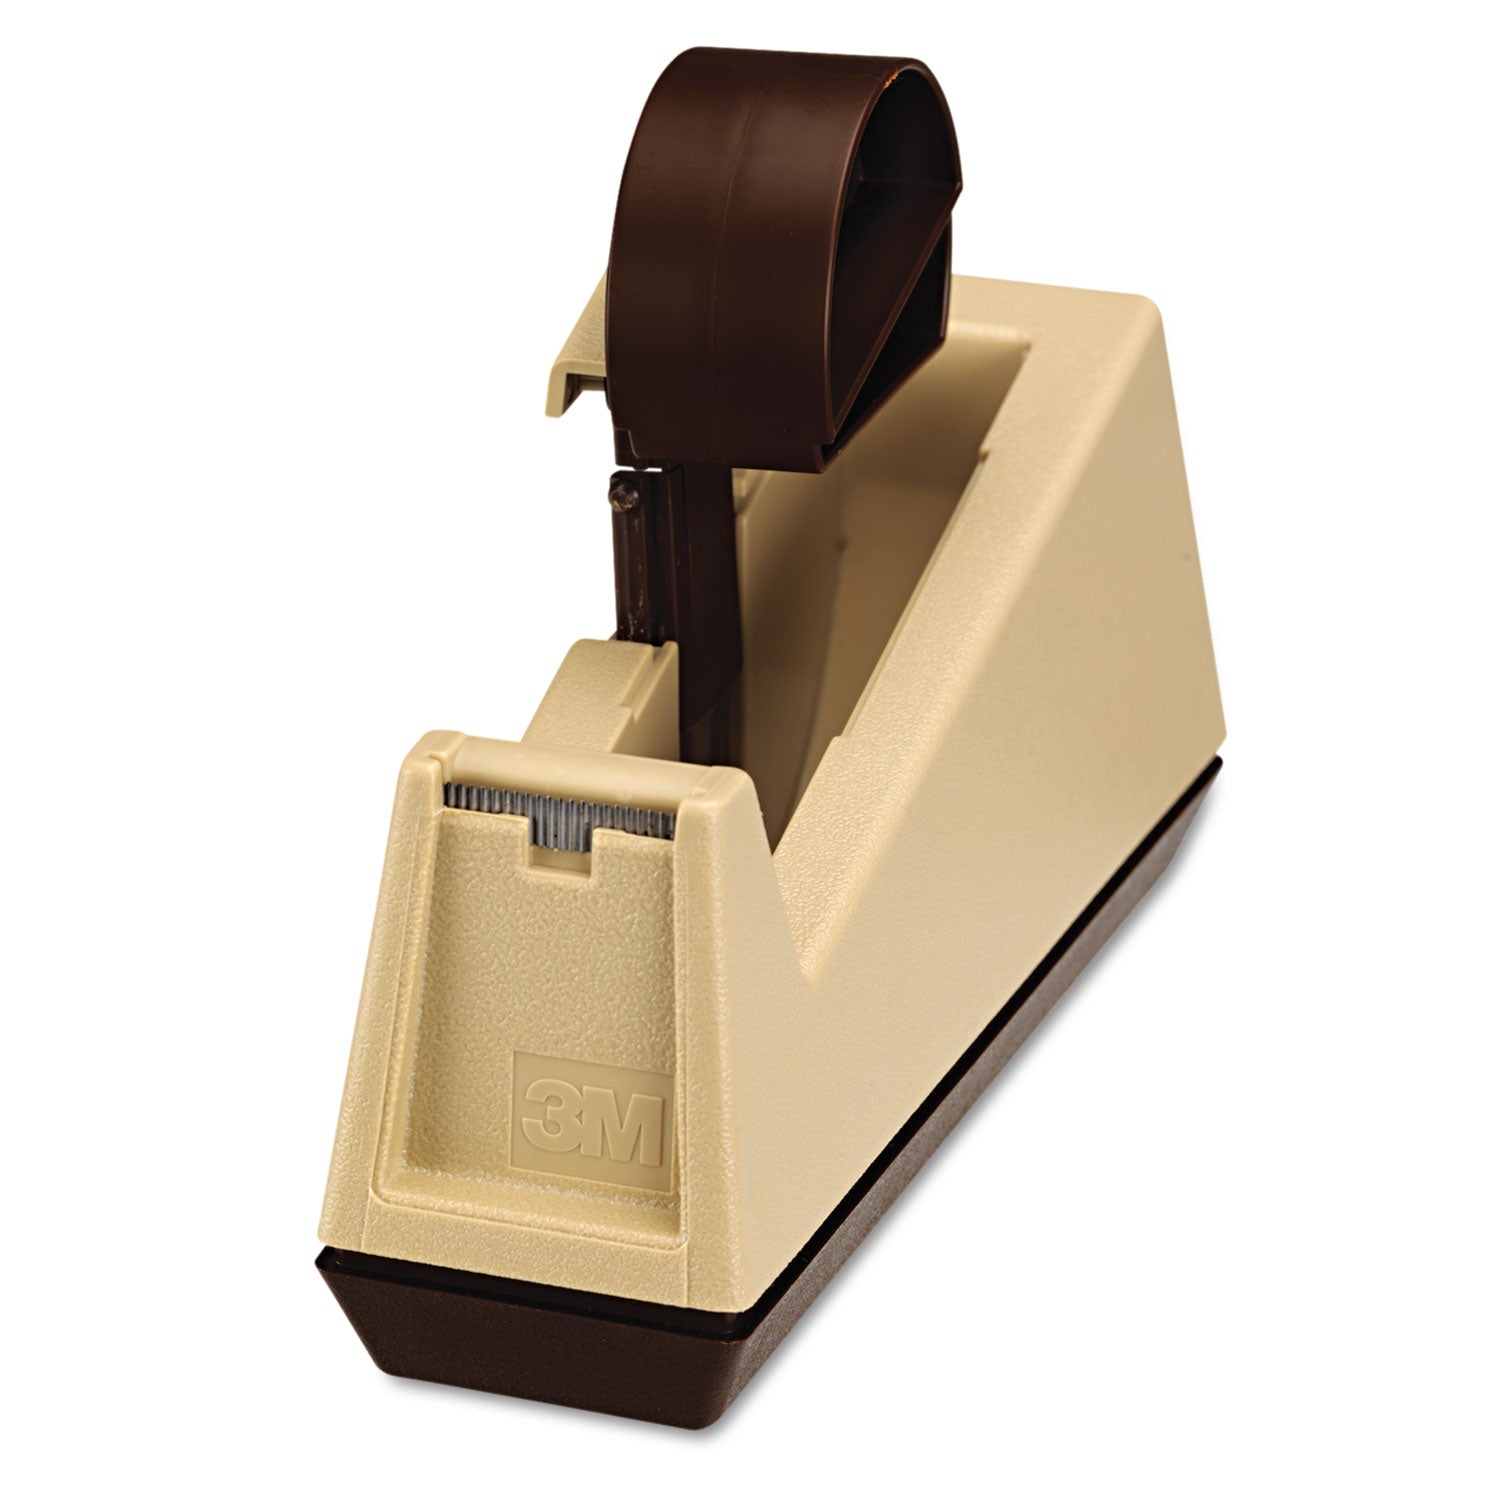 Heavy-Duty Weighted Desktop Tape Dispenser, 3" Core, Plastic, Putty/Brown - 